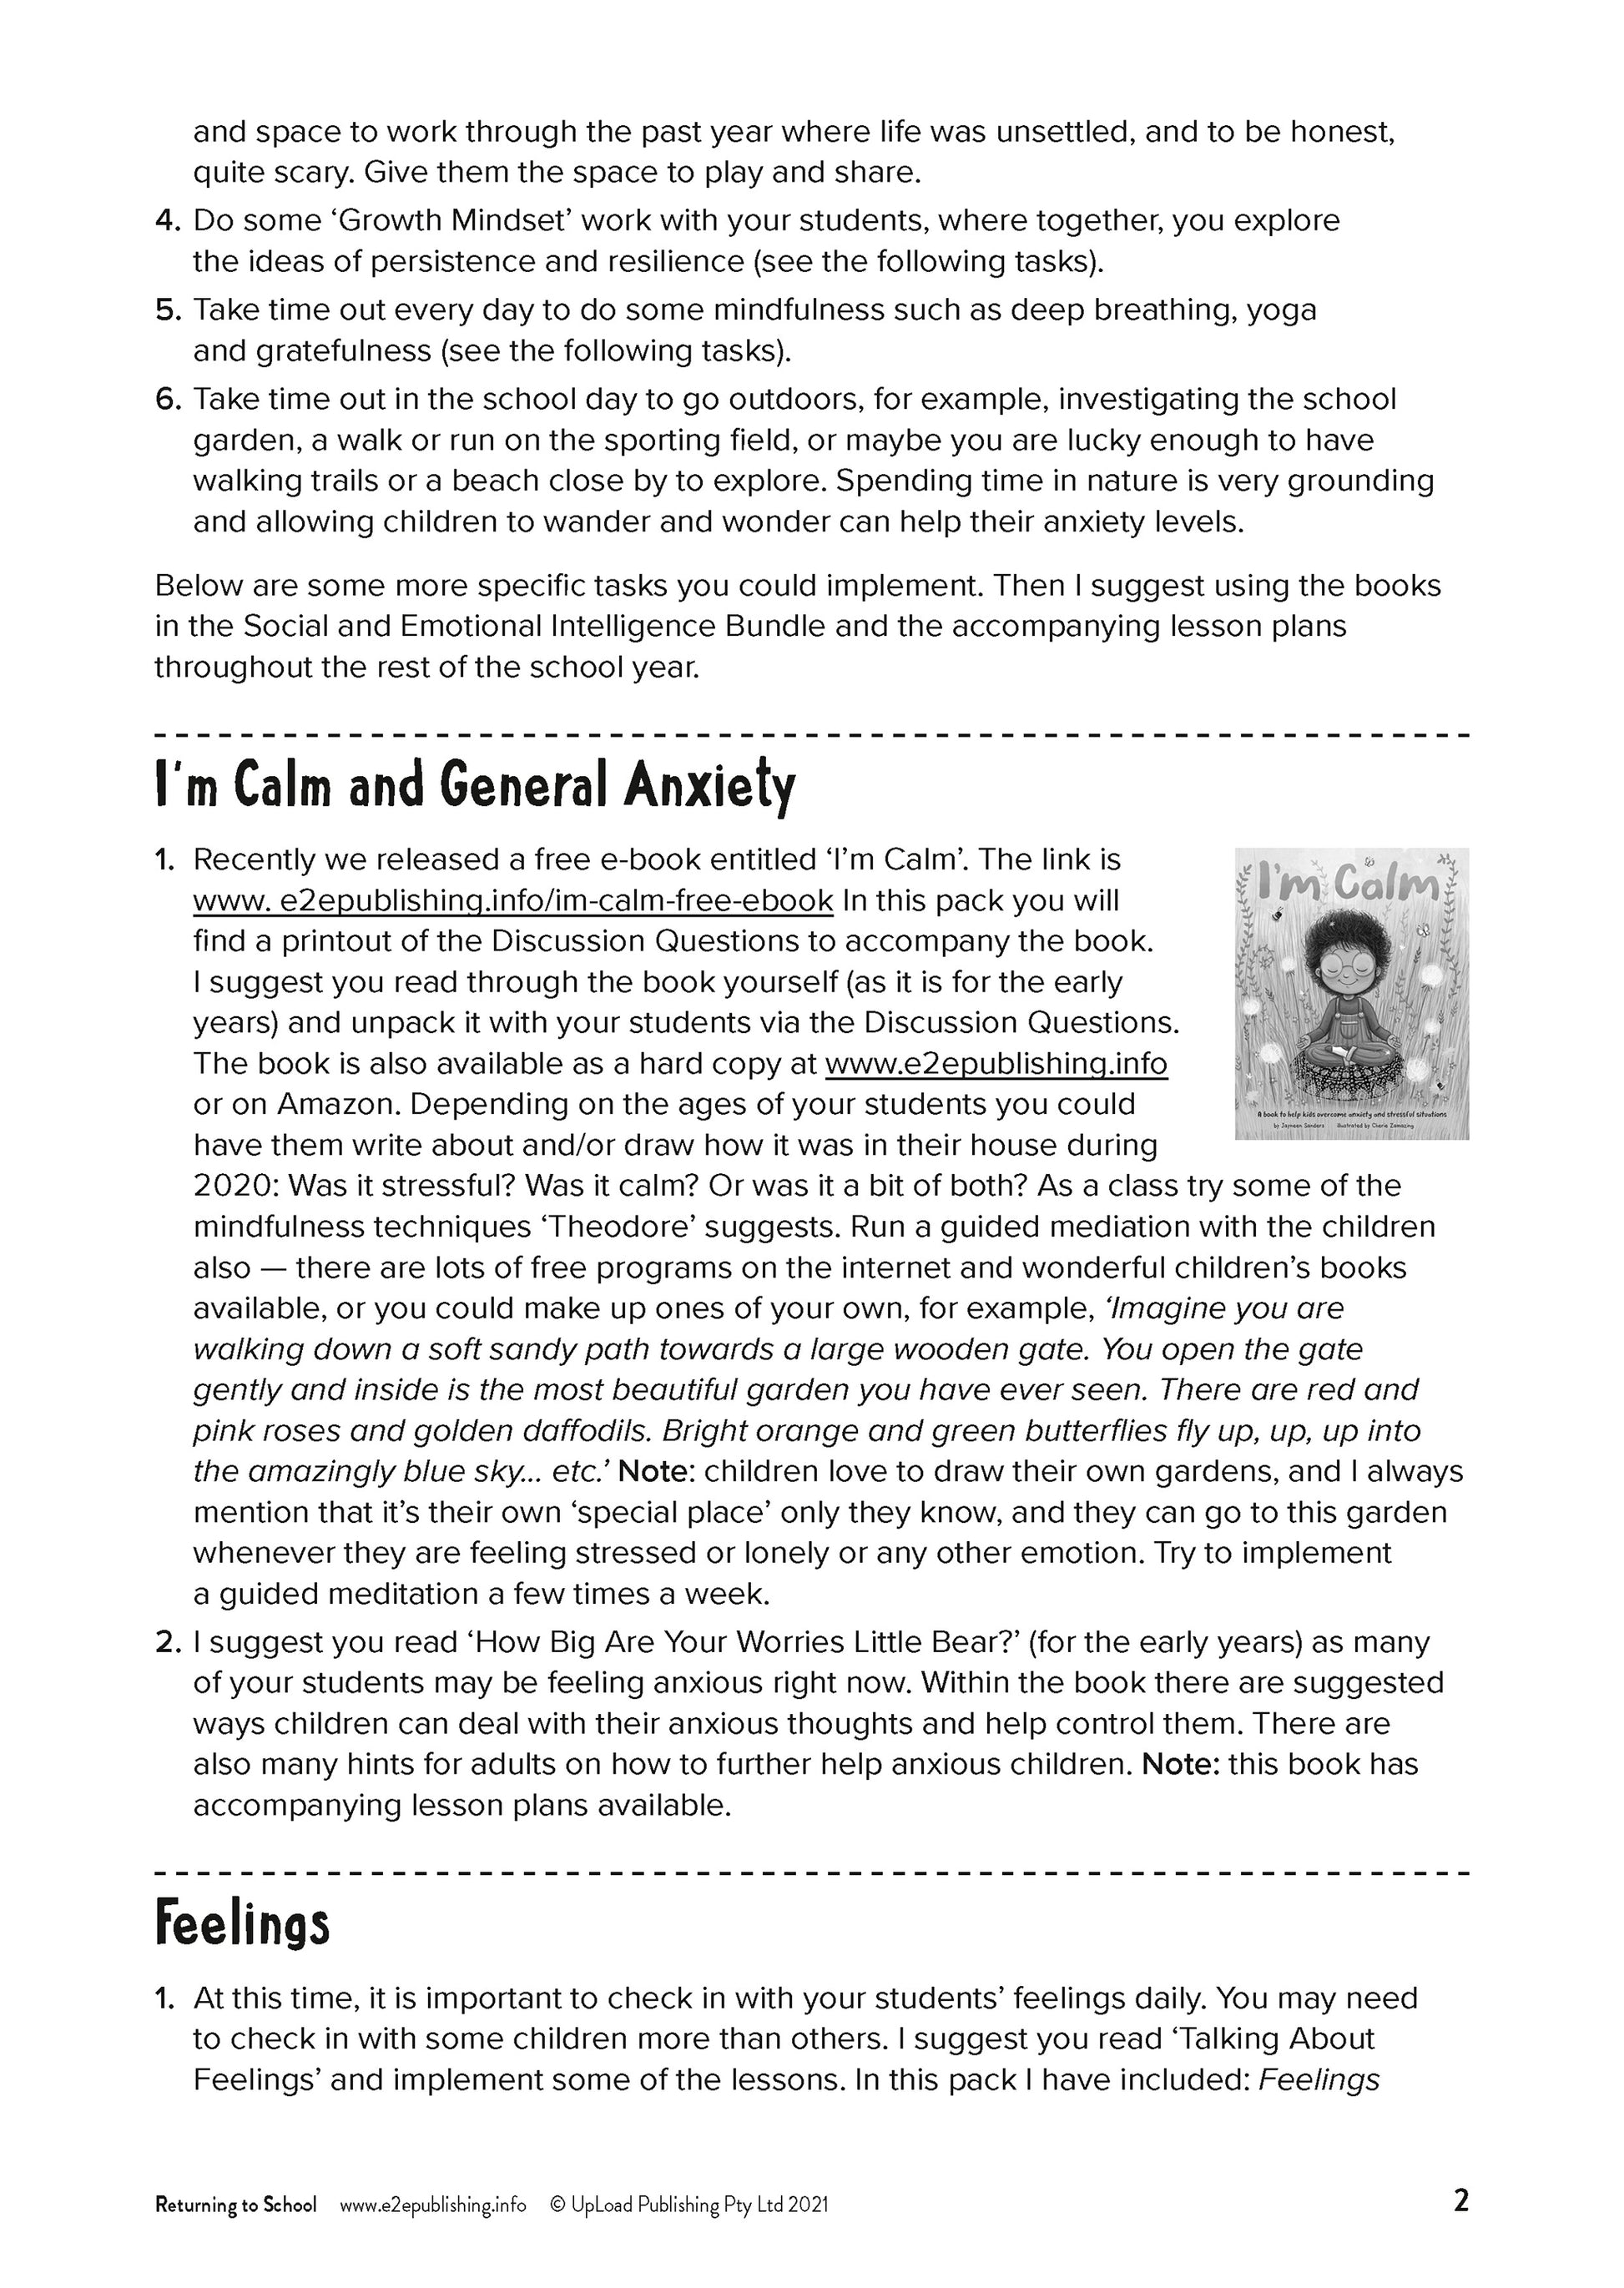 A children's educational activity sheet produced by Educate2Empower